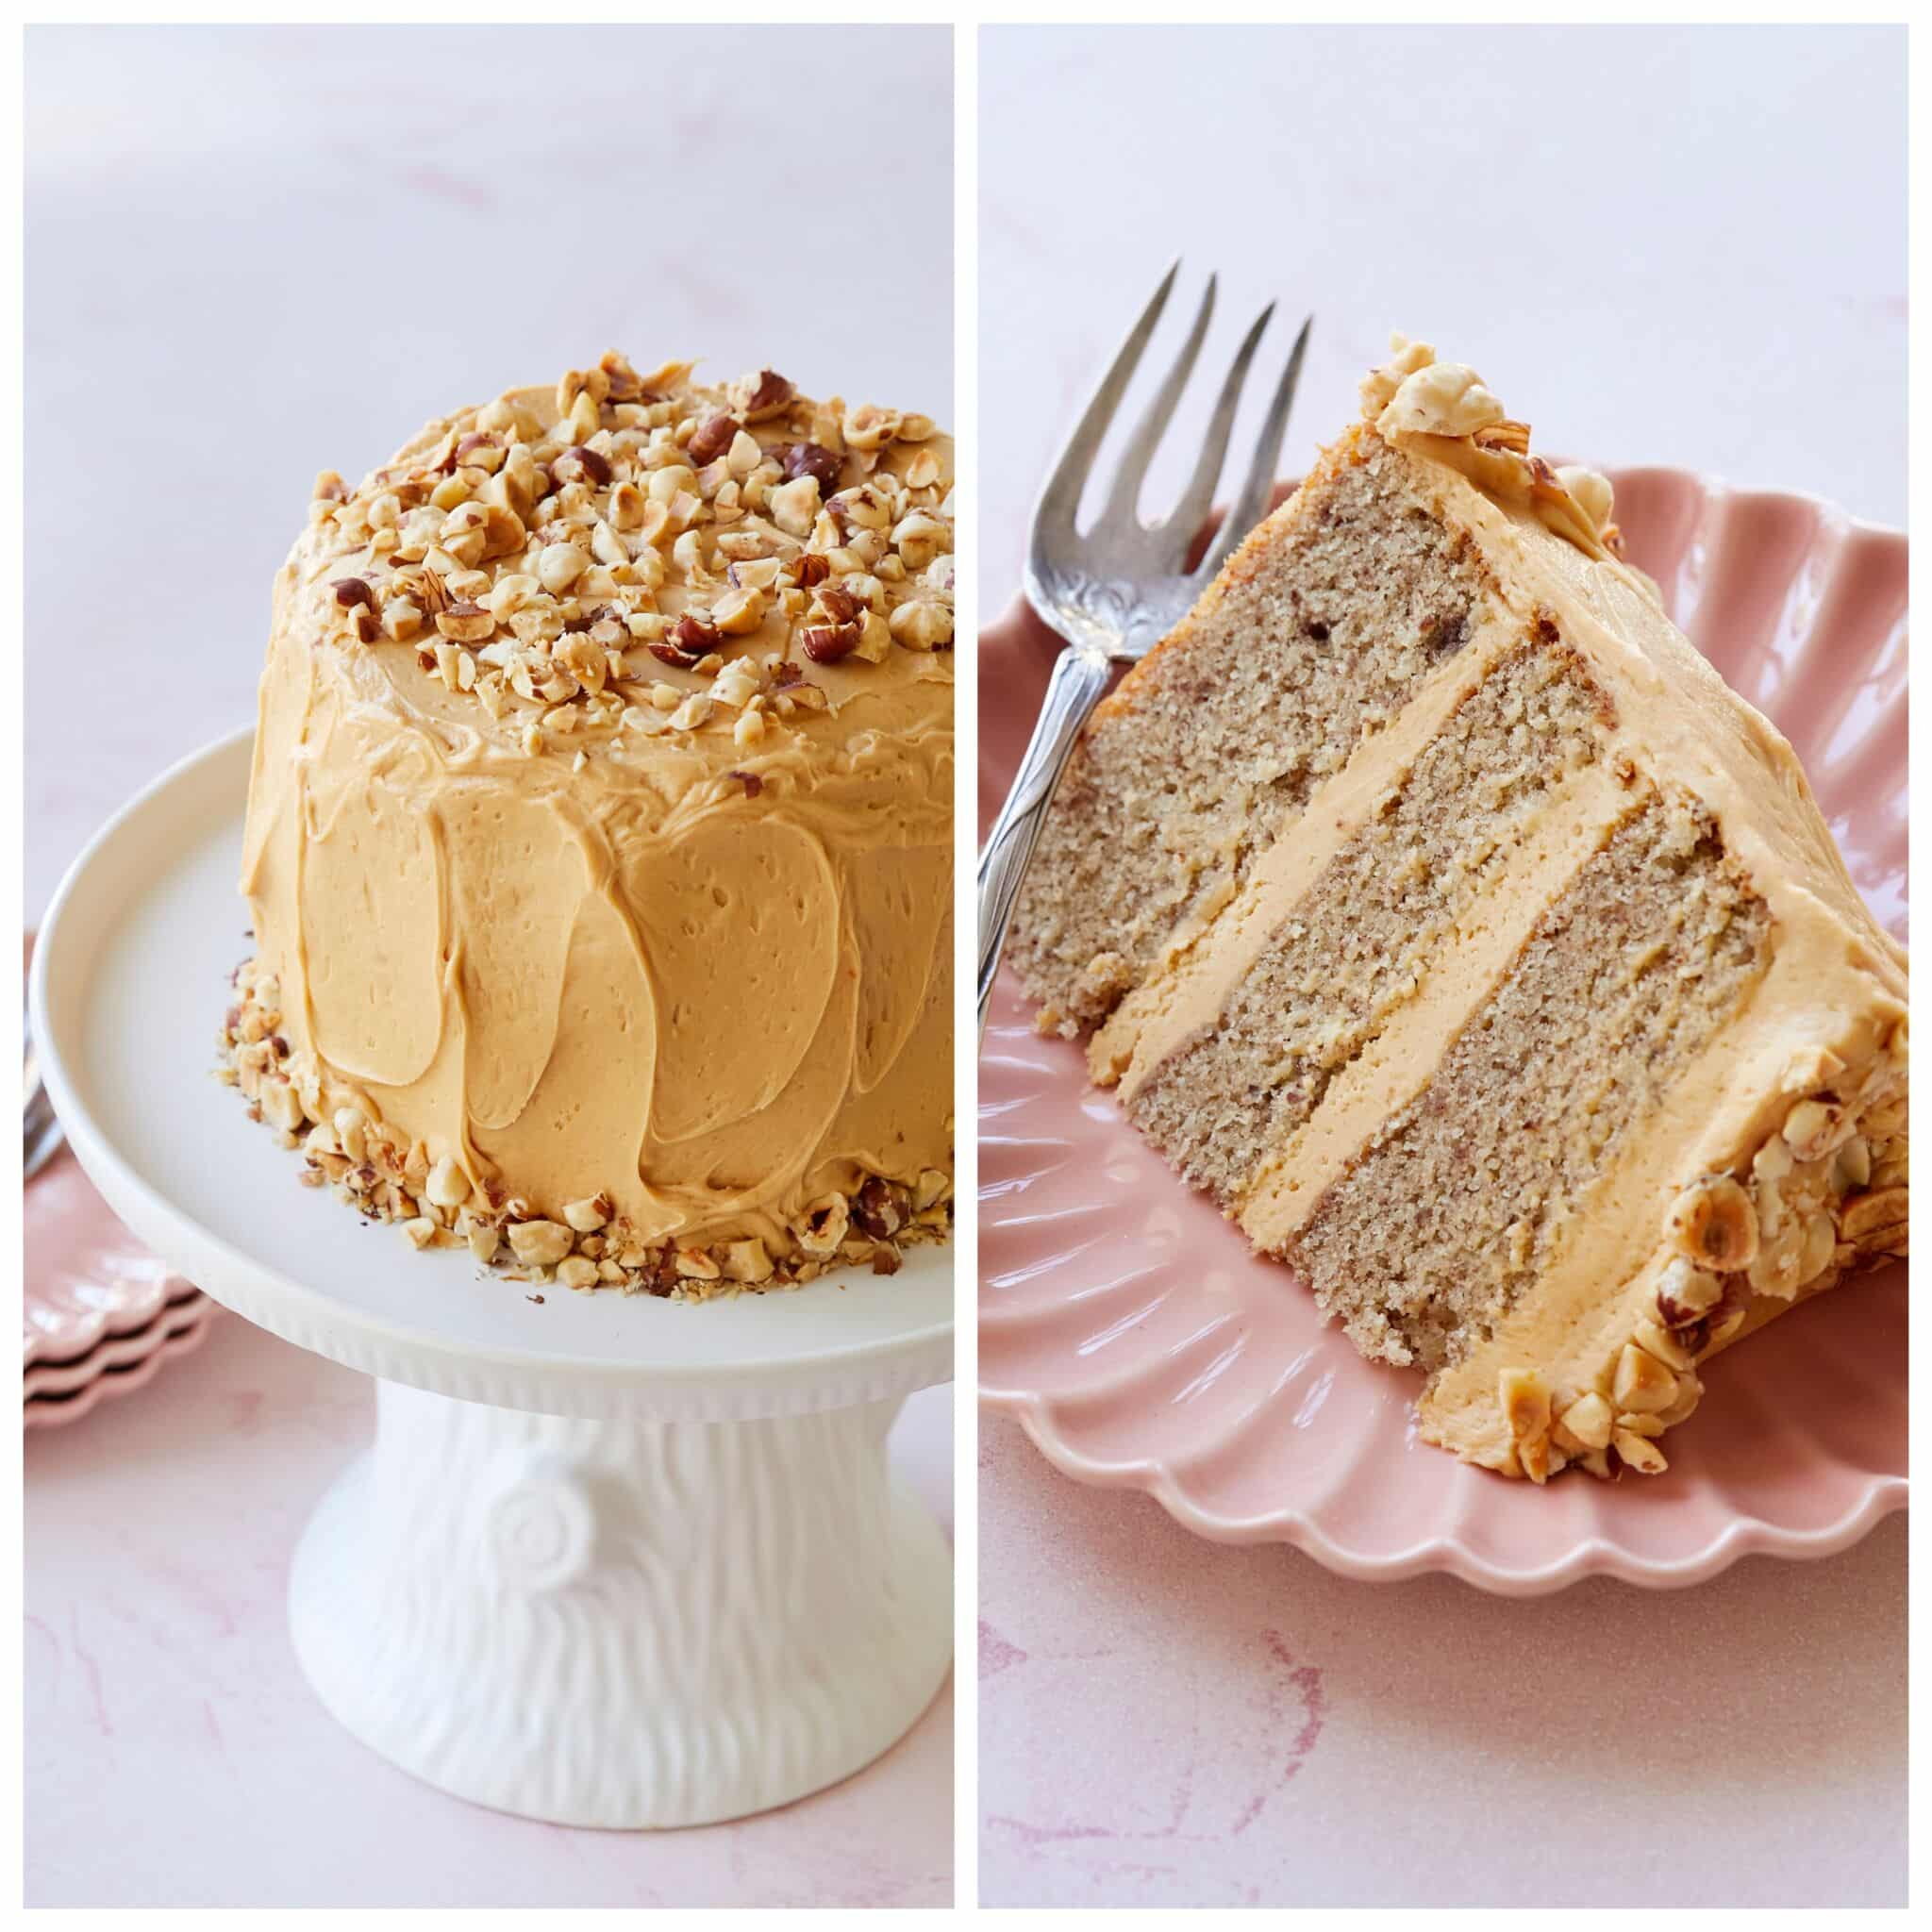 The cake is frosted with Salted Caramel Buttercream frosting on the outside and layered with it on the inside, and topped with chopped toasted peanuts. The close-up shot at the slice shows the soft cake and the creamy Salted Caramel Buttercream filling.